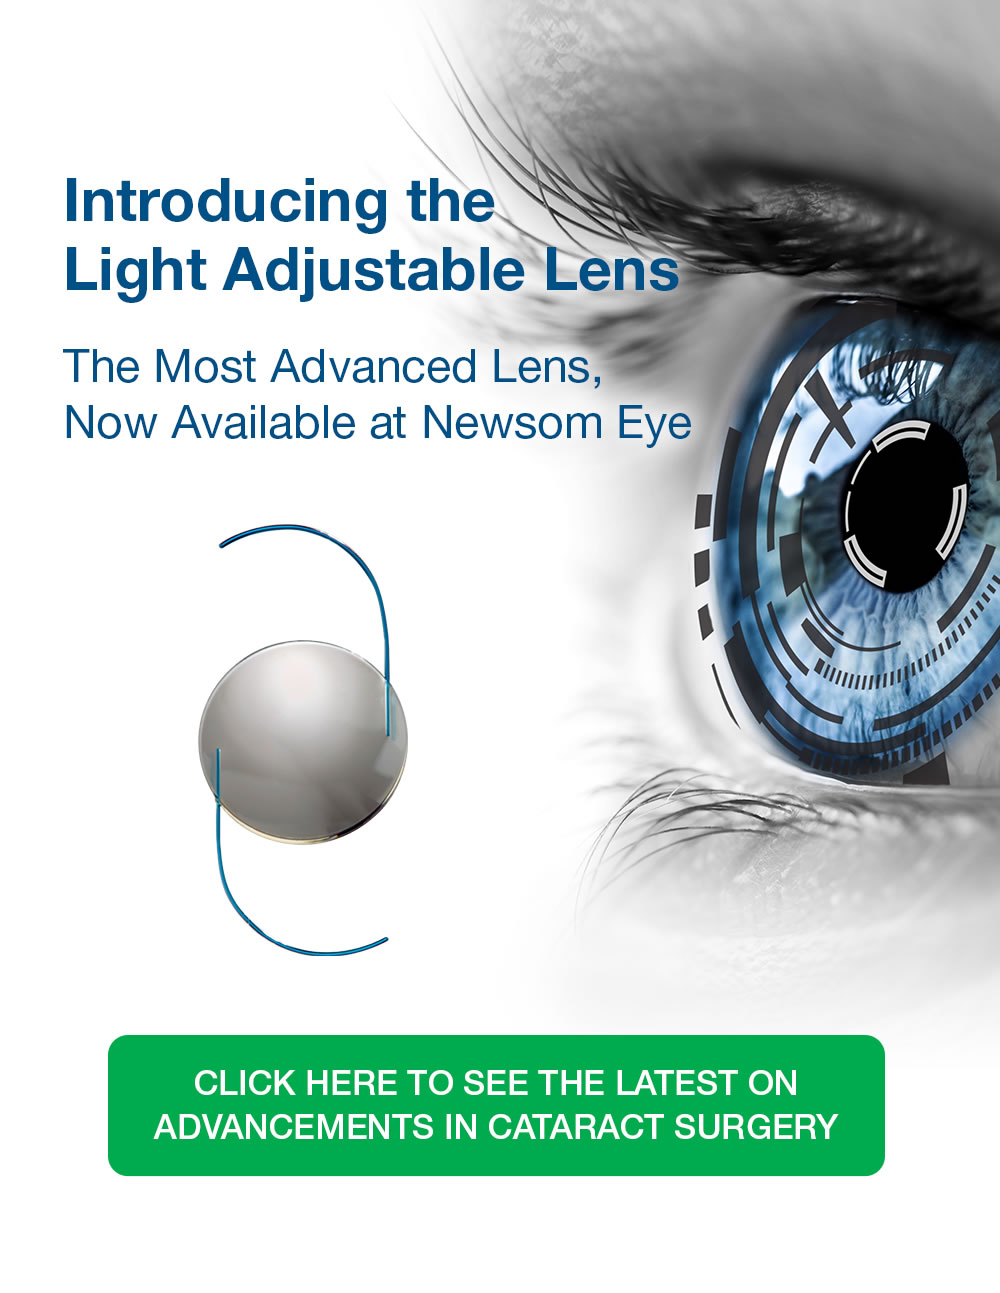 Light Adjustable Lens for Cataract Surgery Patients